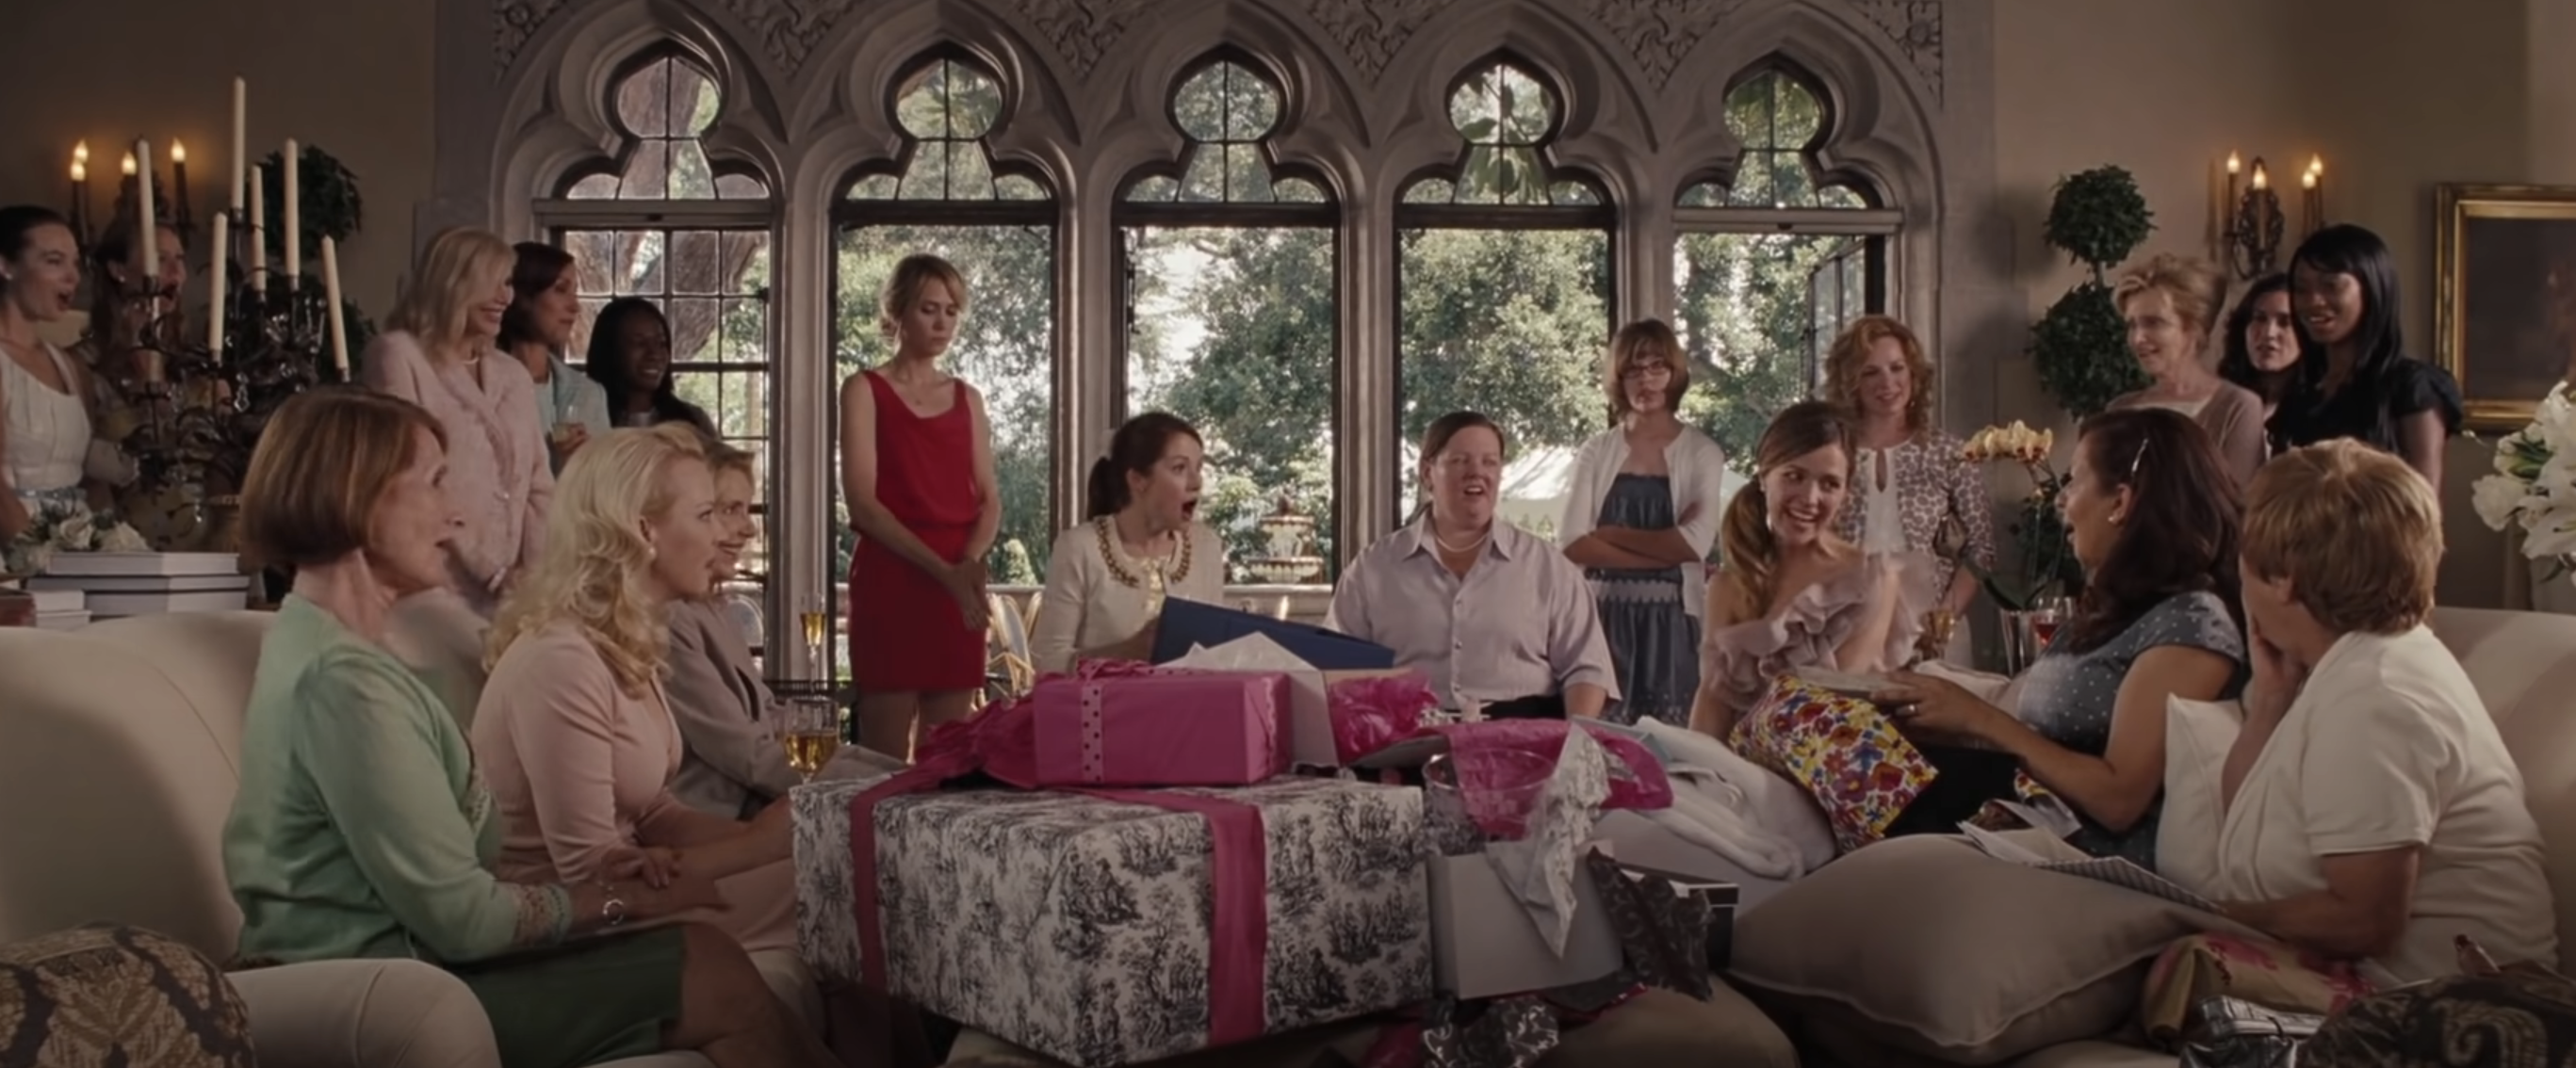 Group of women sitting in a room with presents, from the film &quot;Bridesmaids.&quot;